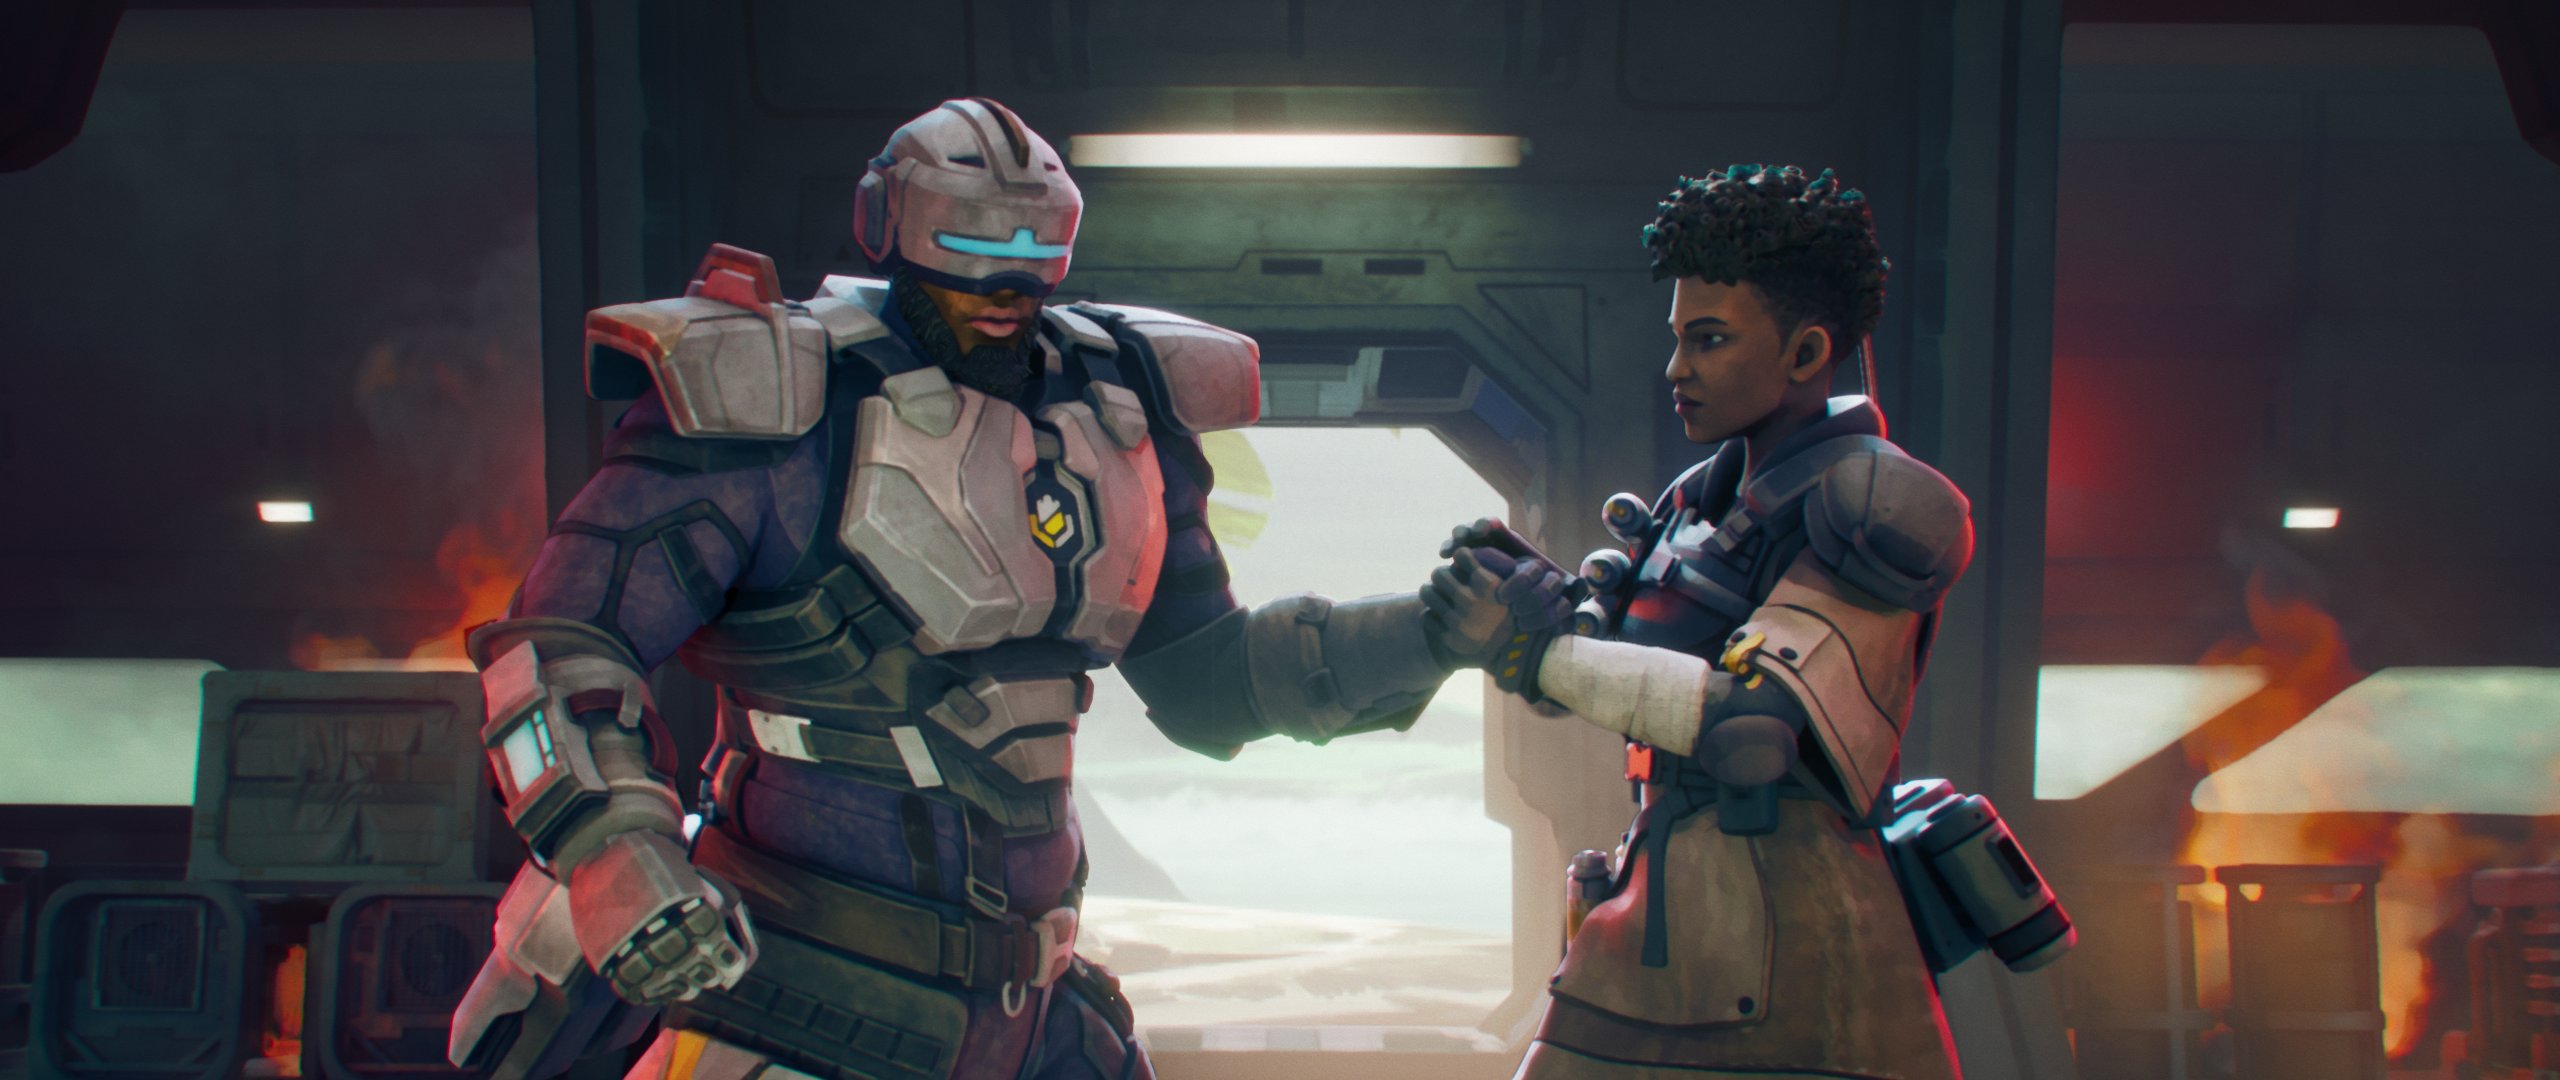 Apex Legends News on X: It's been 1 year since Respawn said cross